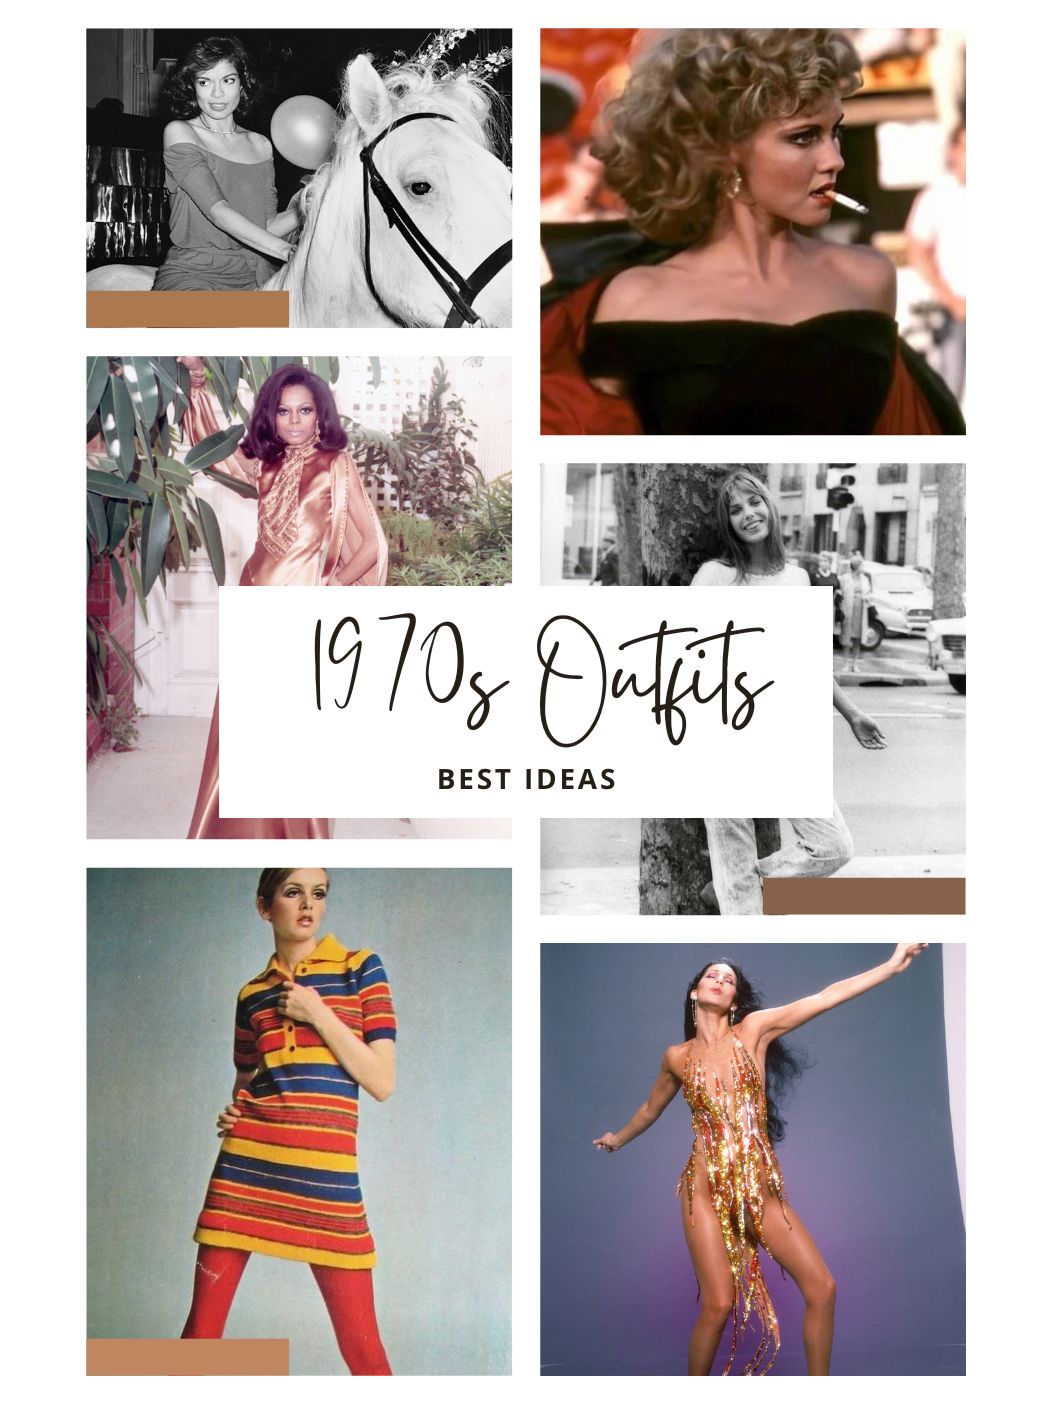  Best 70s Female Outfit Ideas